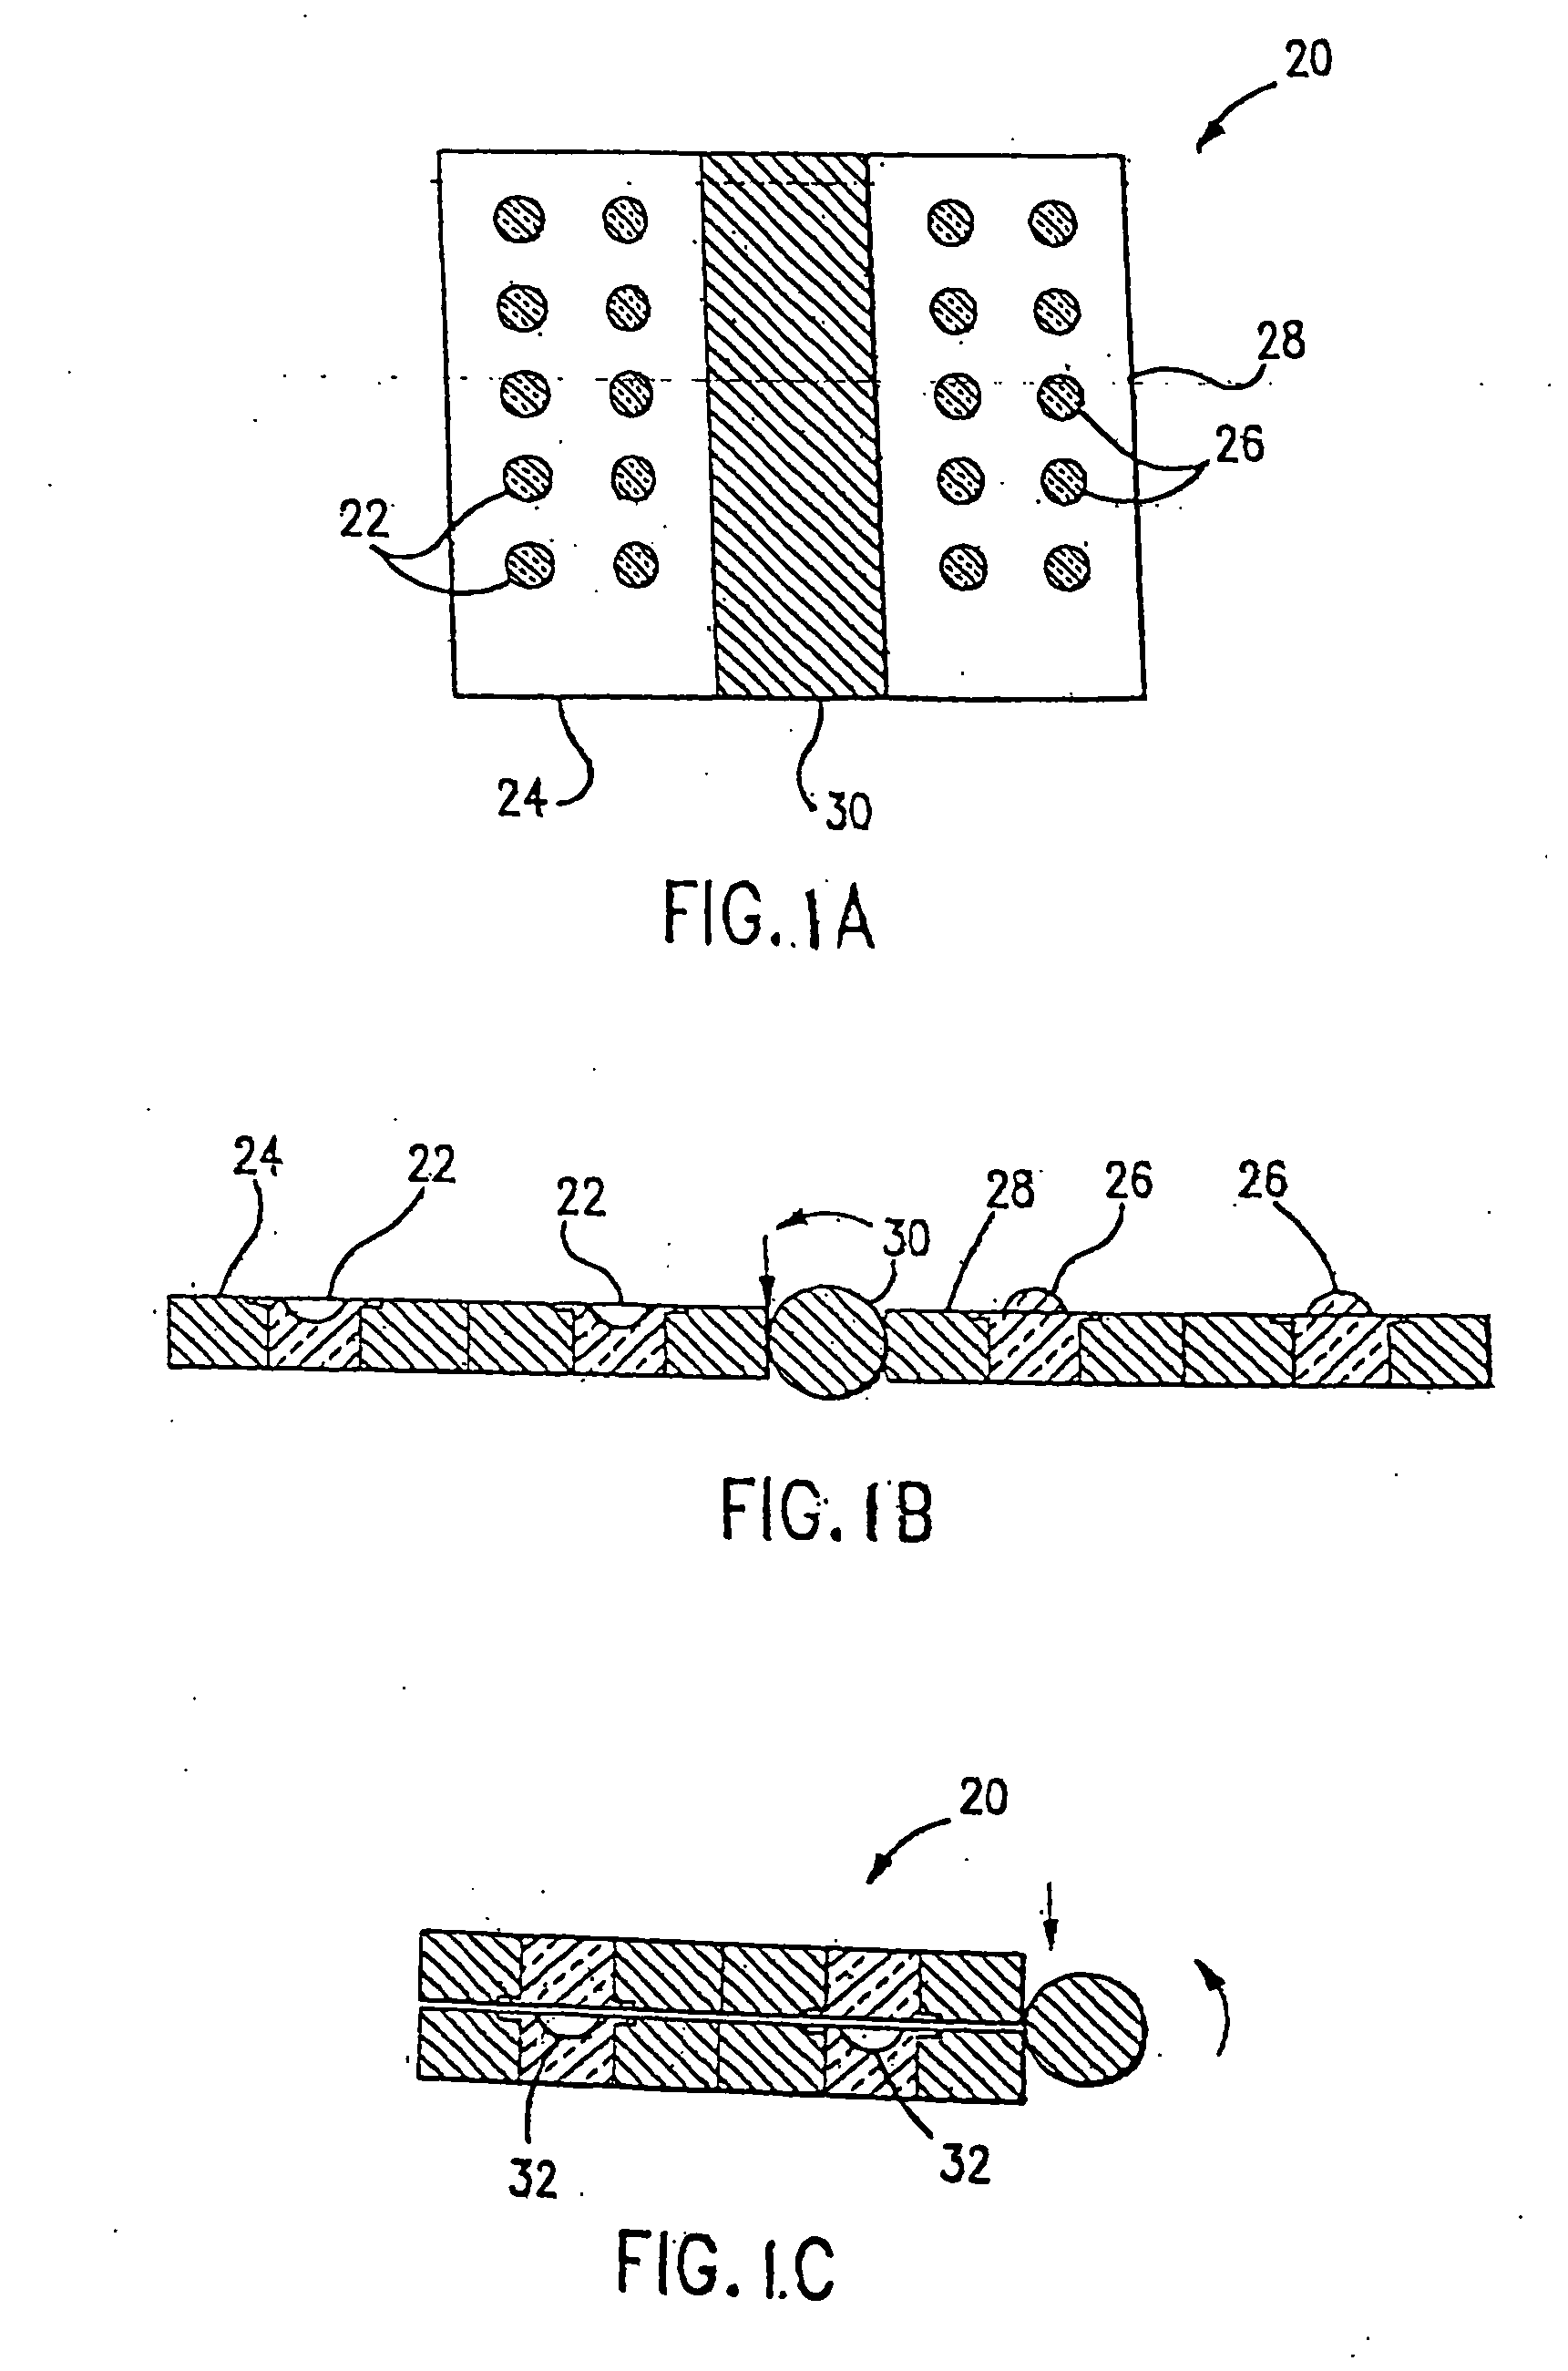 Method of manufacturing ophthalmic lenses using modulated energy